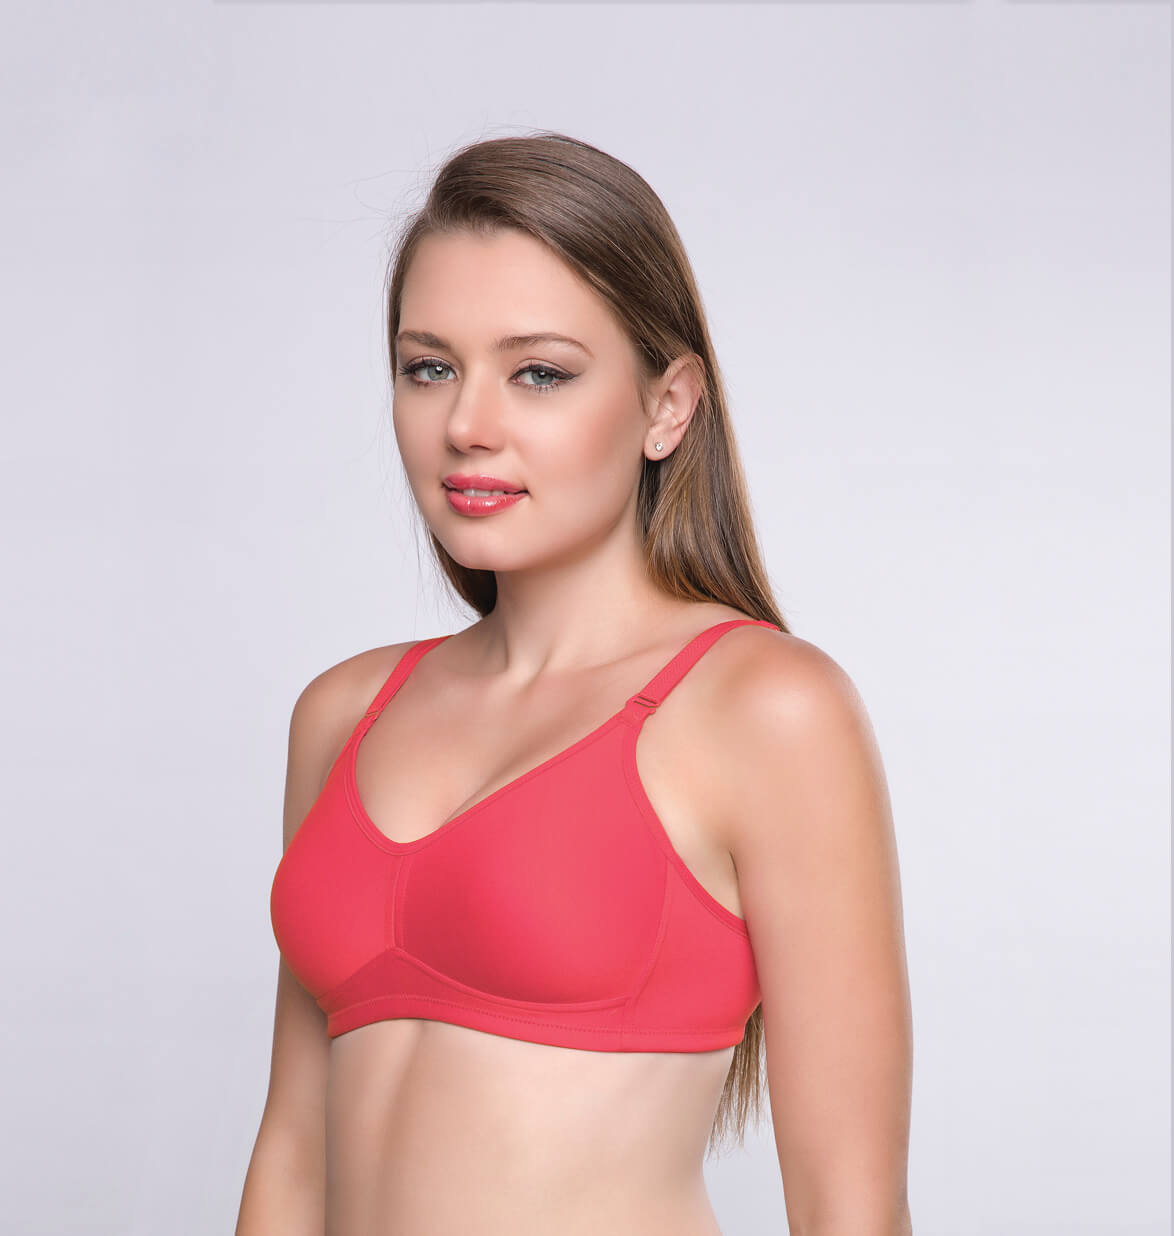 Trylo Intimates on X: Experience unparalleled comfort and confidence with Riza  Minimizer. Product shown-Riza Minimizer #TryloIndia #TryloIntimates  #RizaIntimates #RizabyTrylo #RizaMinimizer #ComfortAndConfidence  #SleekSilhouette